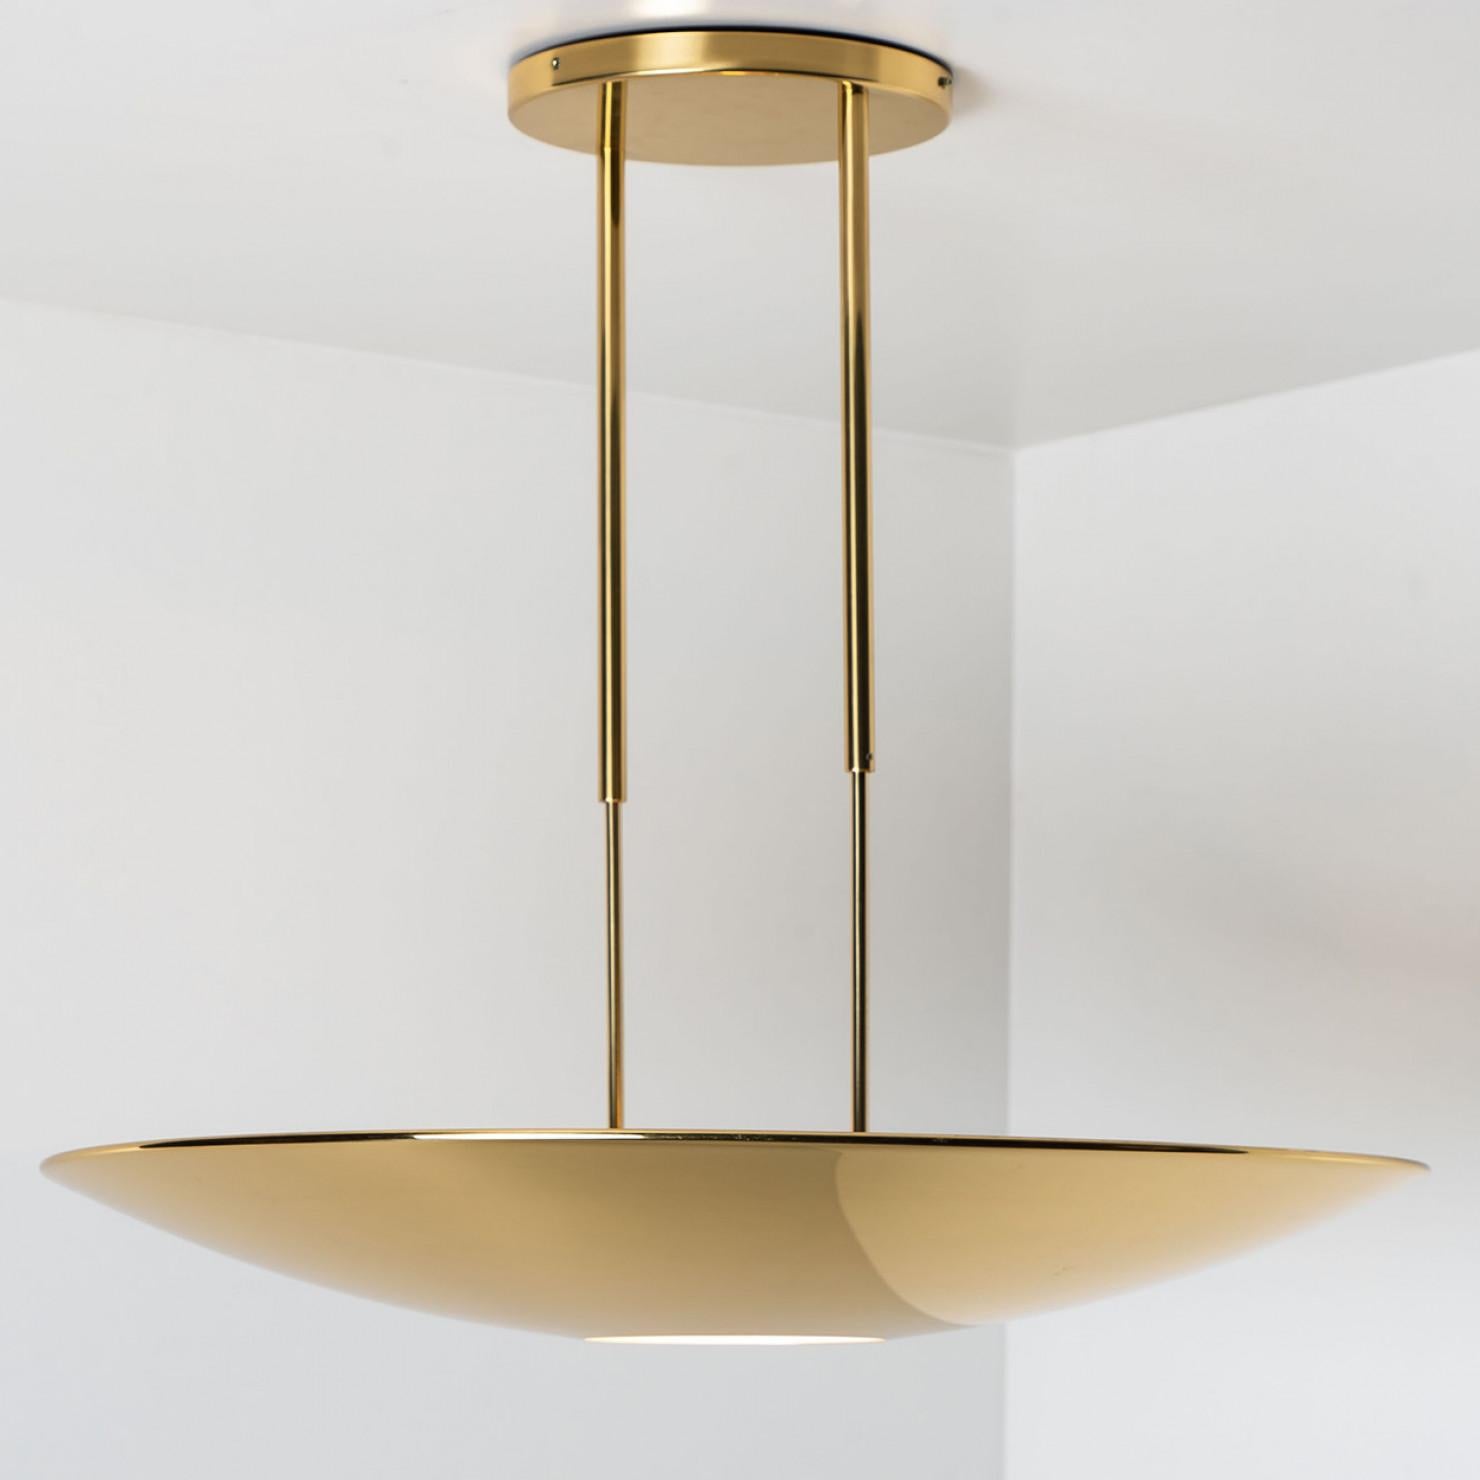 High quality brass pendant lamp or ceiling fixture by Florian Schulz. The light has an opening at the bottom for a round diffuser out of glass. It is 80 cm in diameter and radiates a direct and an indirect lighting.
The light is adjustable in height